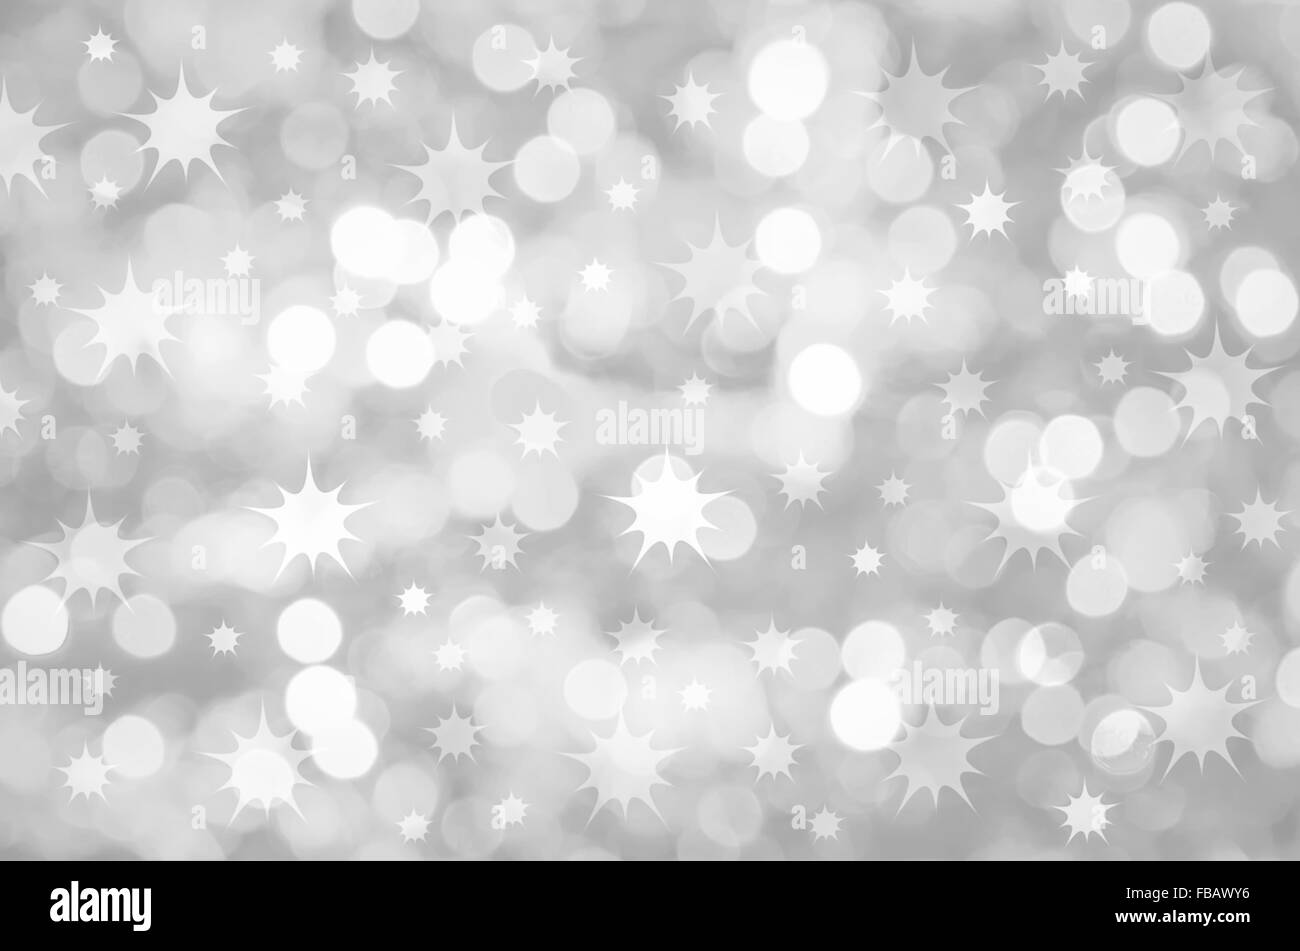 Blurry background Black and White Stock Photos & Images - Alamy